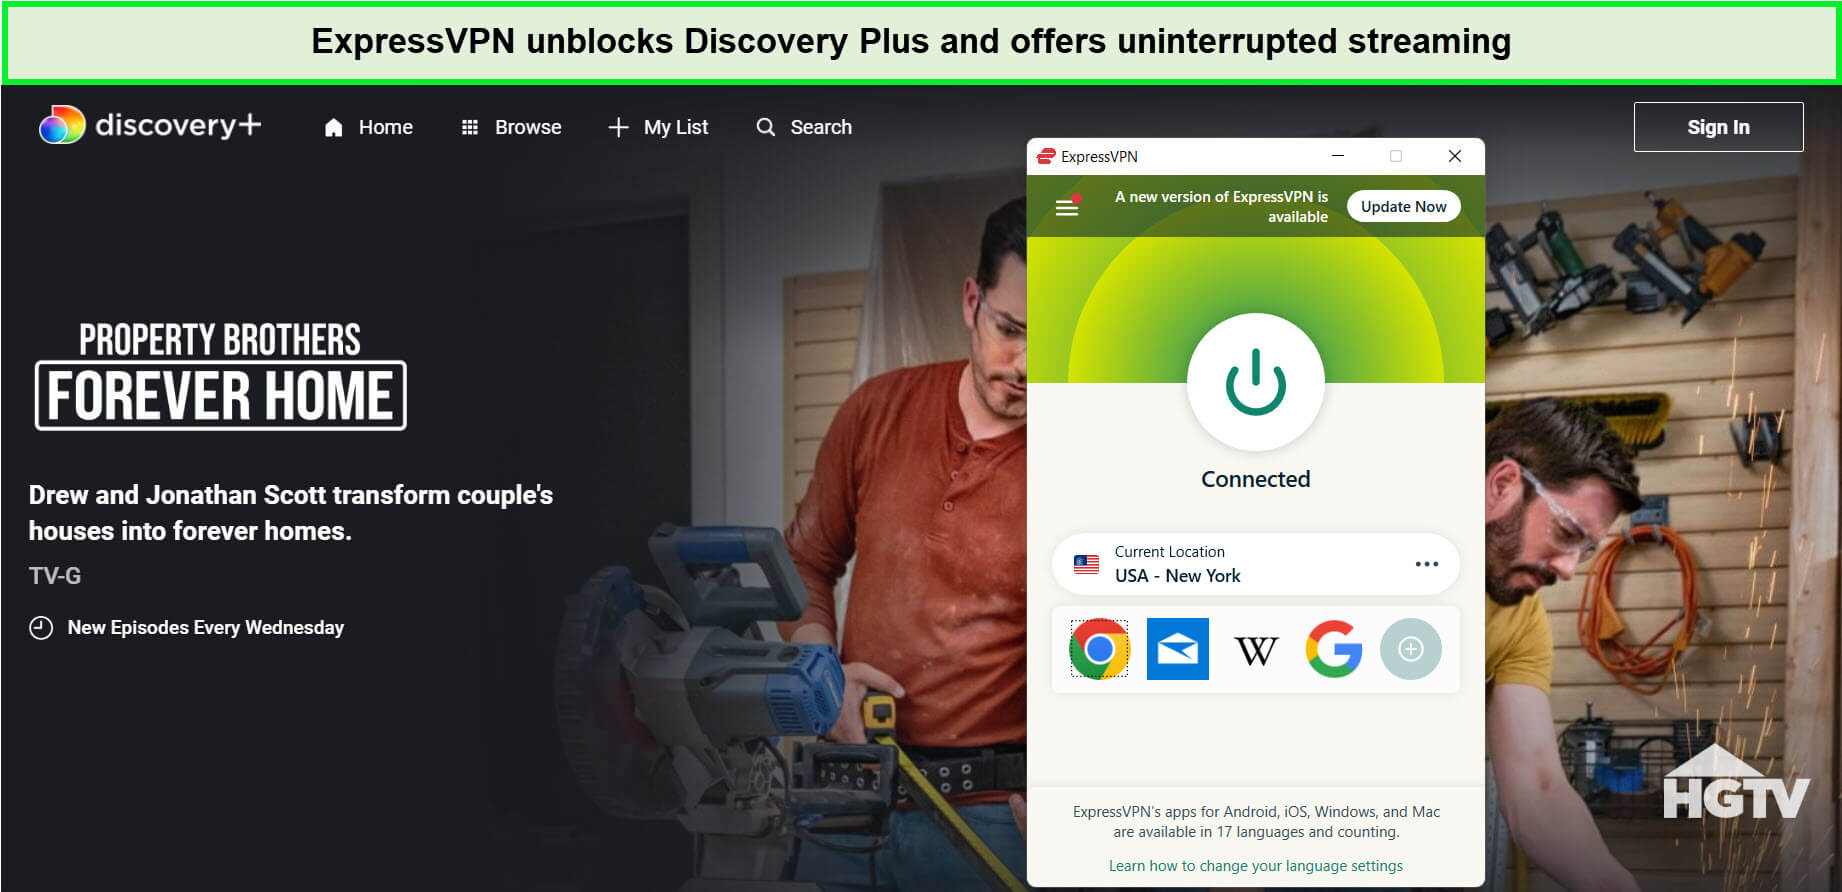 expressvpn-unblocks-property-brothers-forever-home-season-8-on-discovery-plus-in-uk